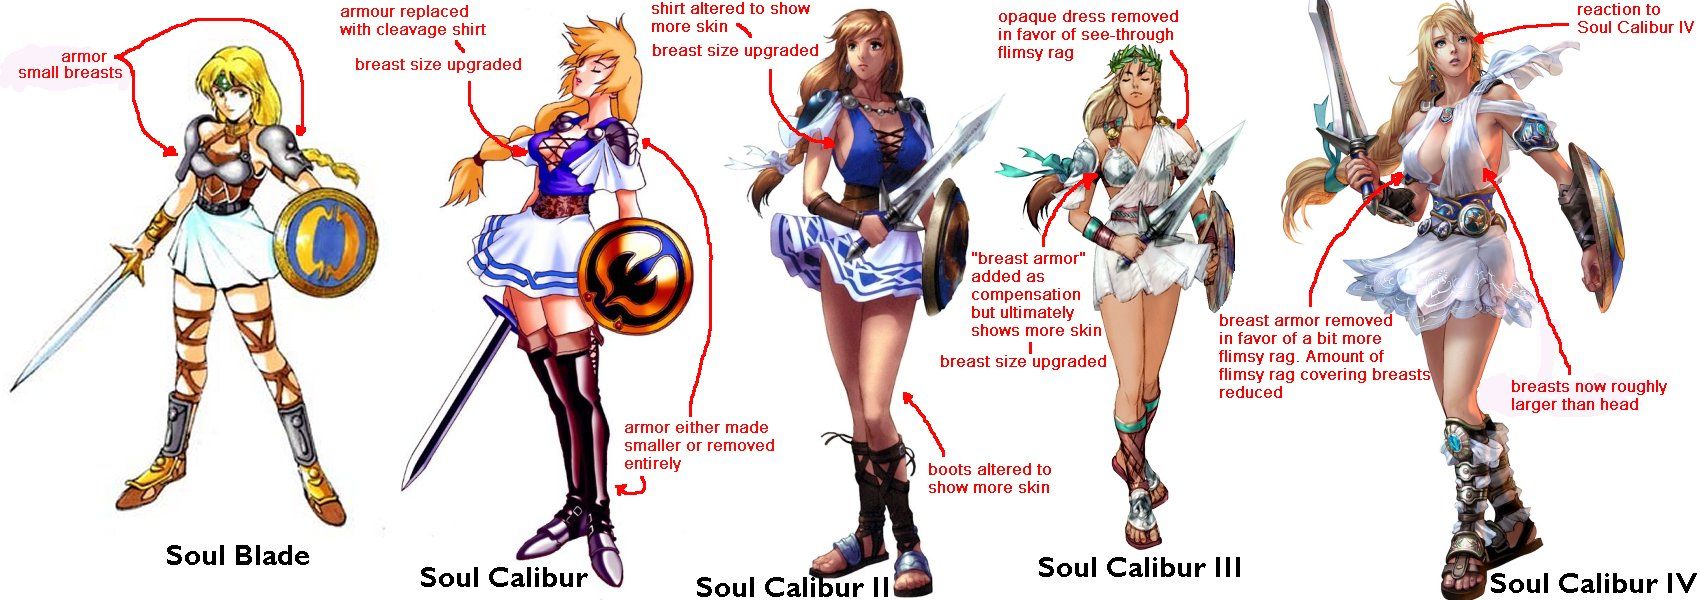 Sophitia from the <i>Soul</i> series, 1997 to 2008